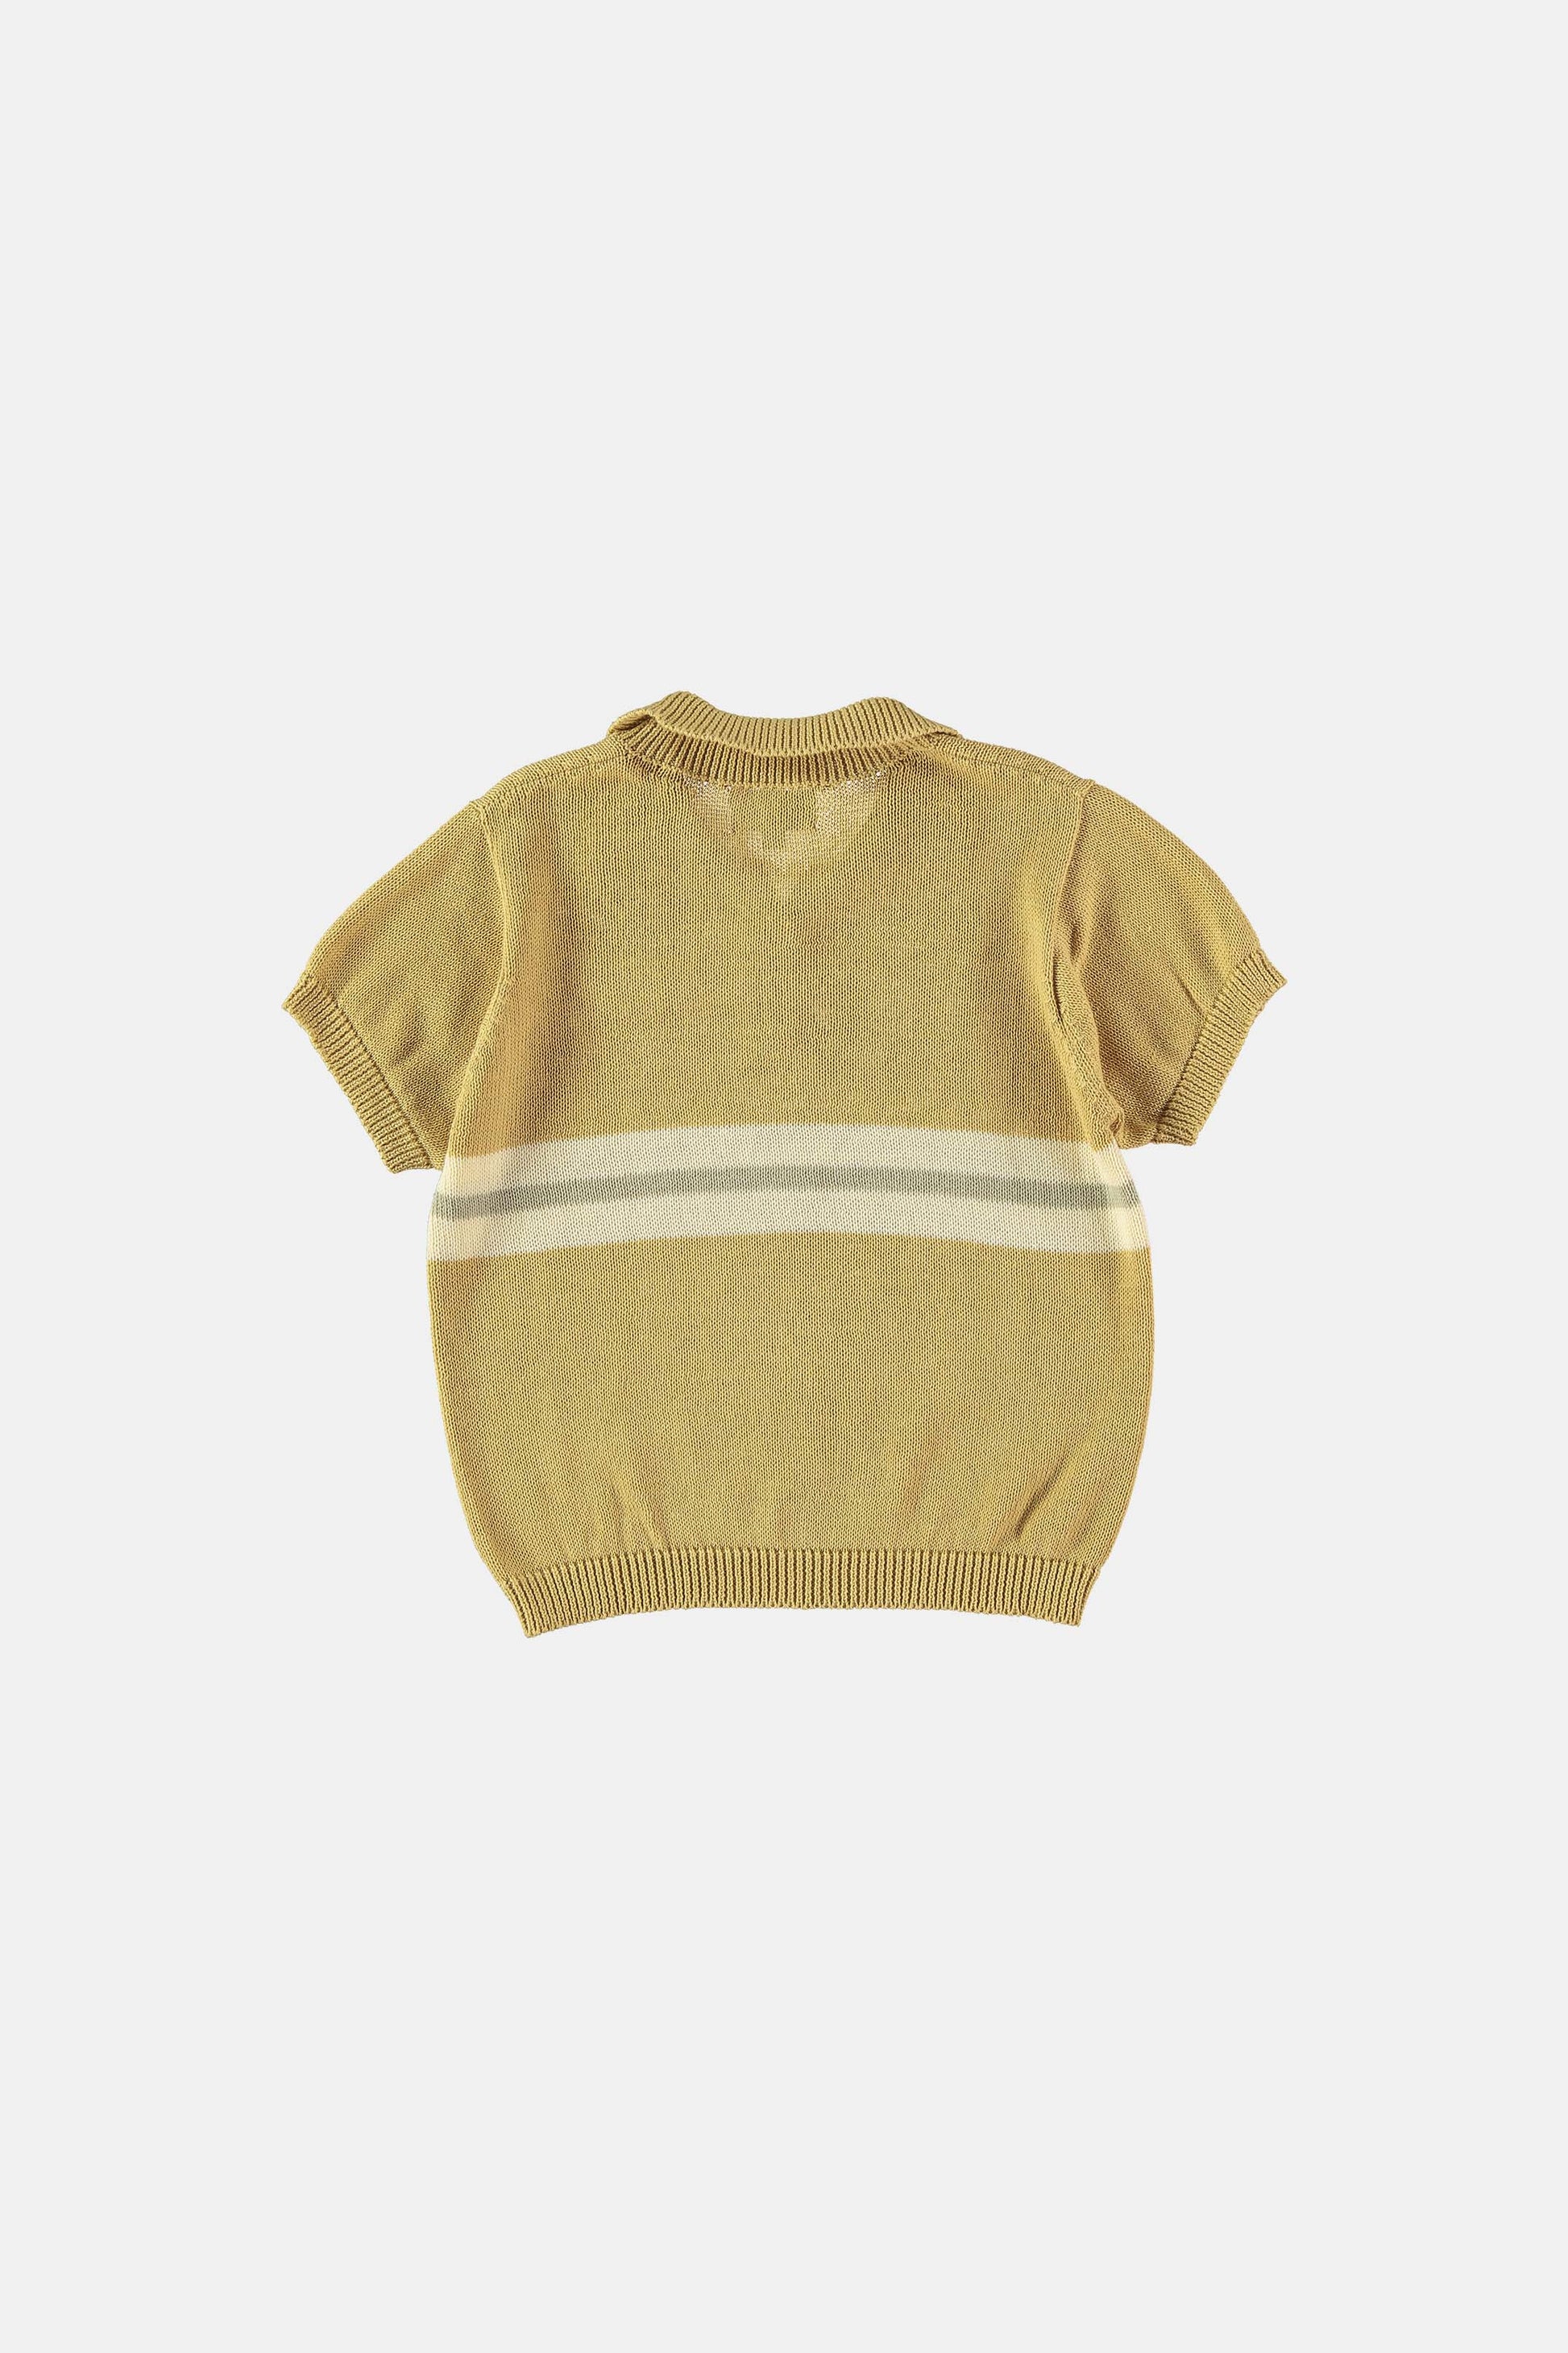 Coco Au Lait YELLOW KNITTED POLO  Yellow